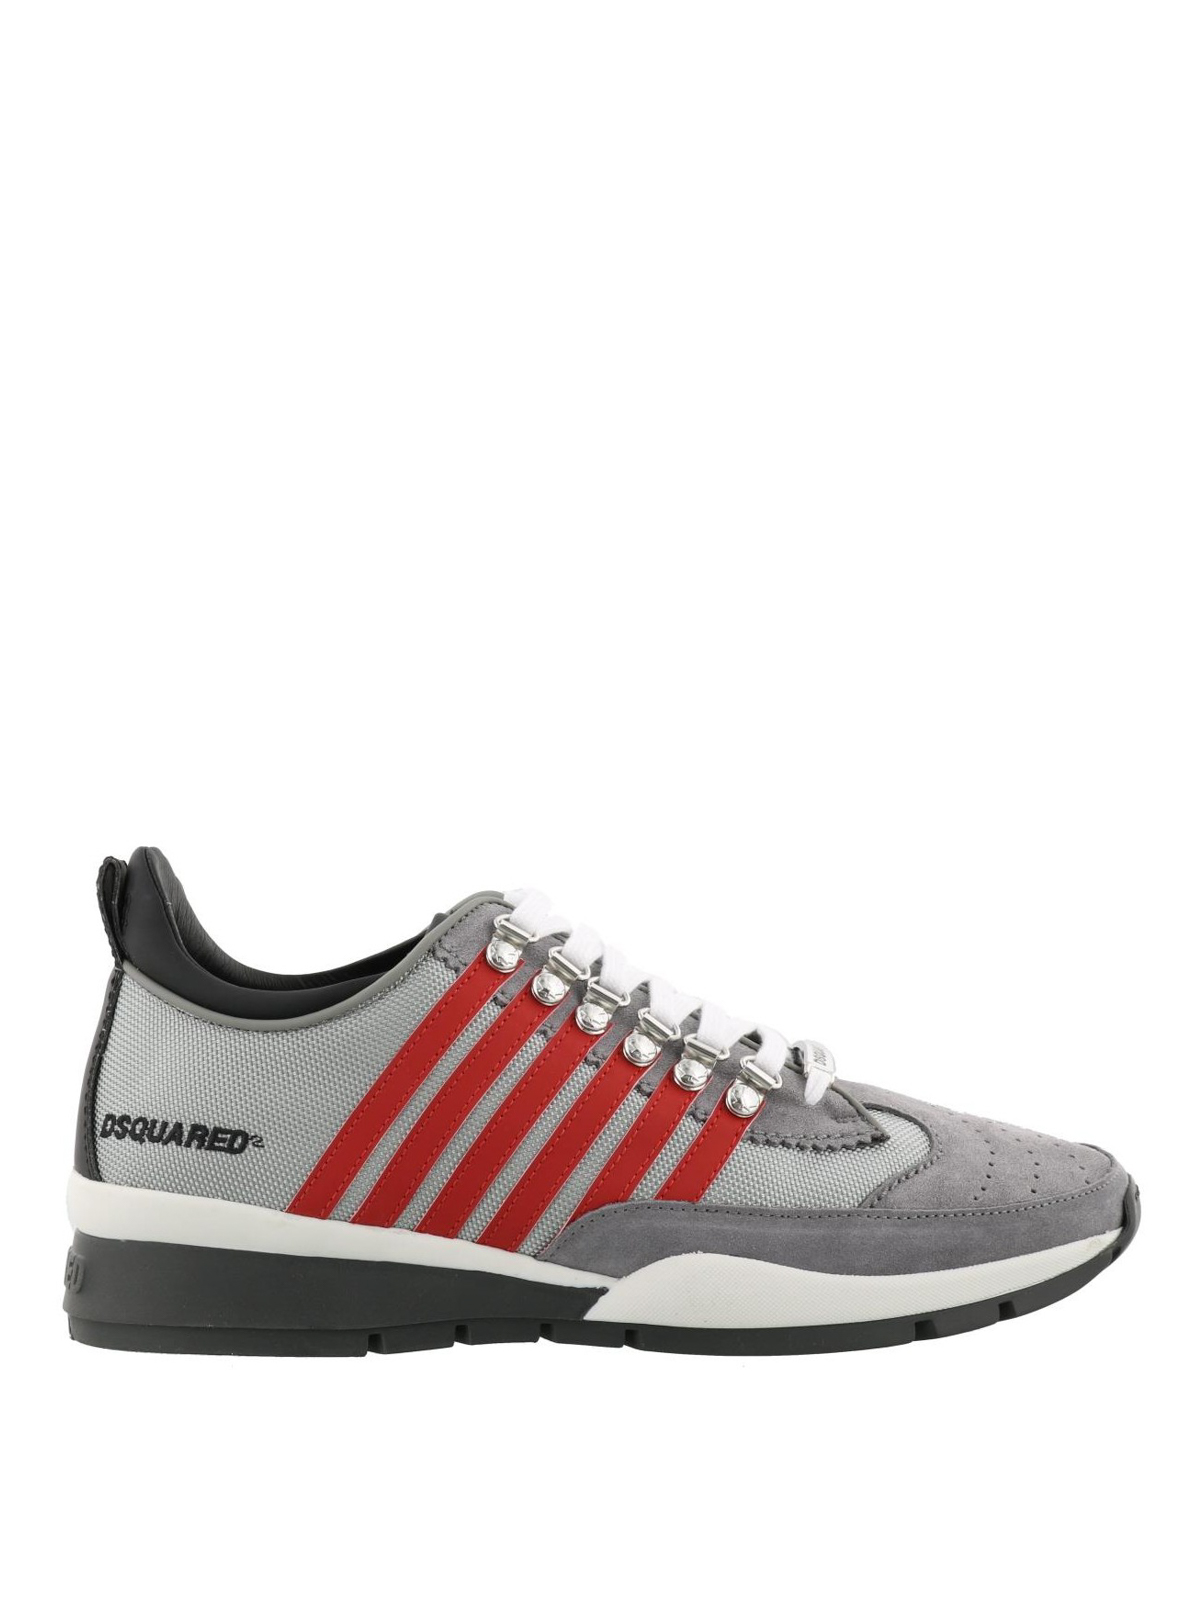 boeket Thespian dialect Trainers Dsquared2 - 251 grey and red sneakers - SNM010116800451M119